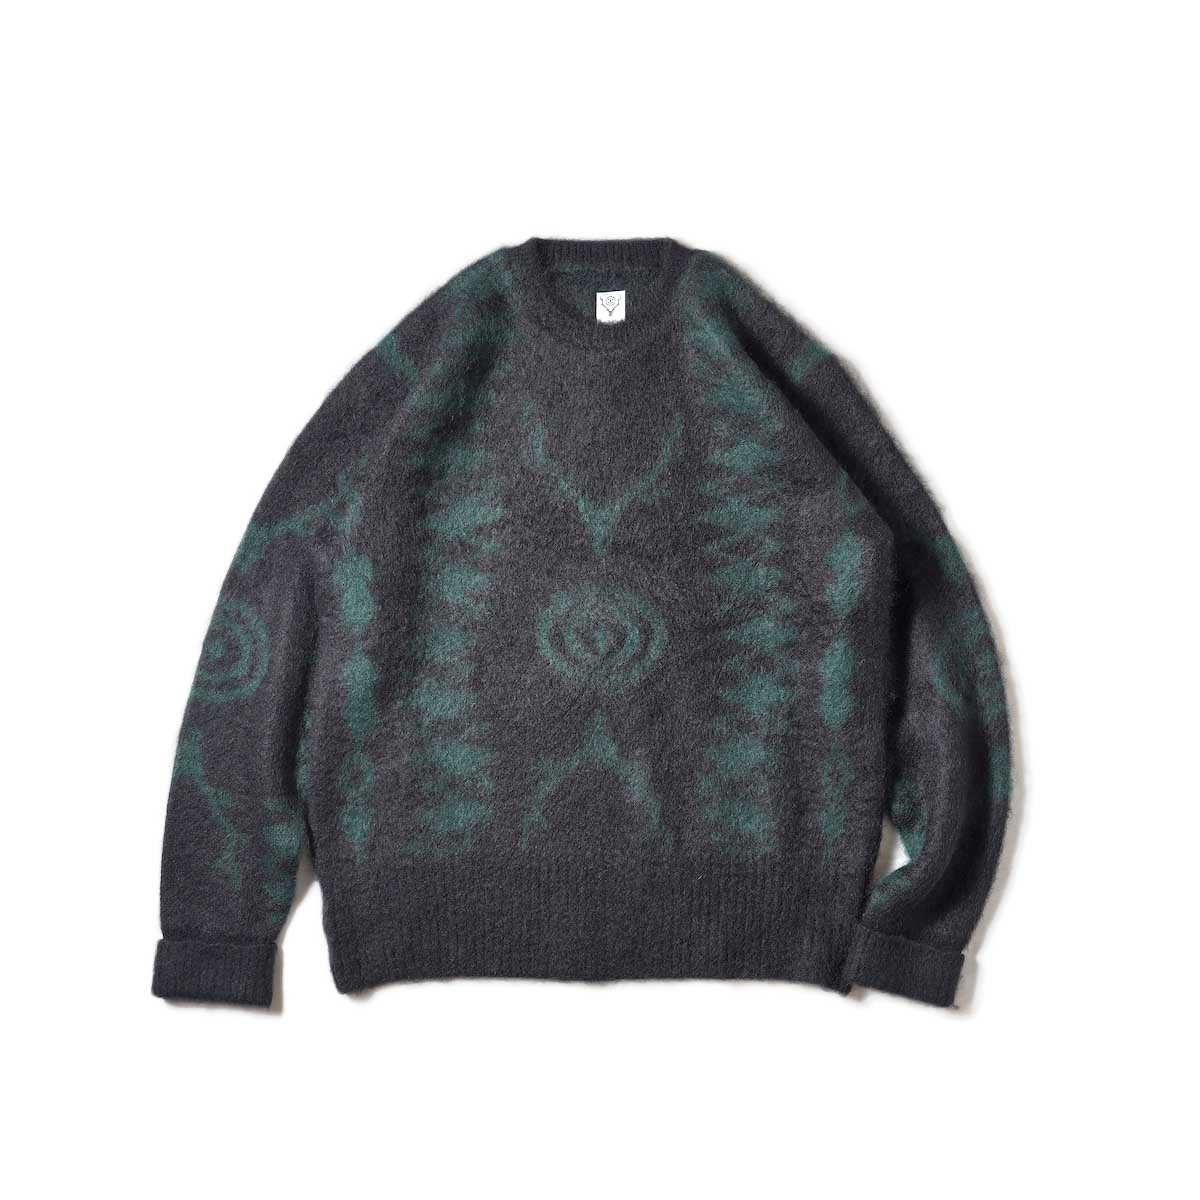 South2 West8 / Loose Fit Sweater - S2W8 Native (Black)